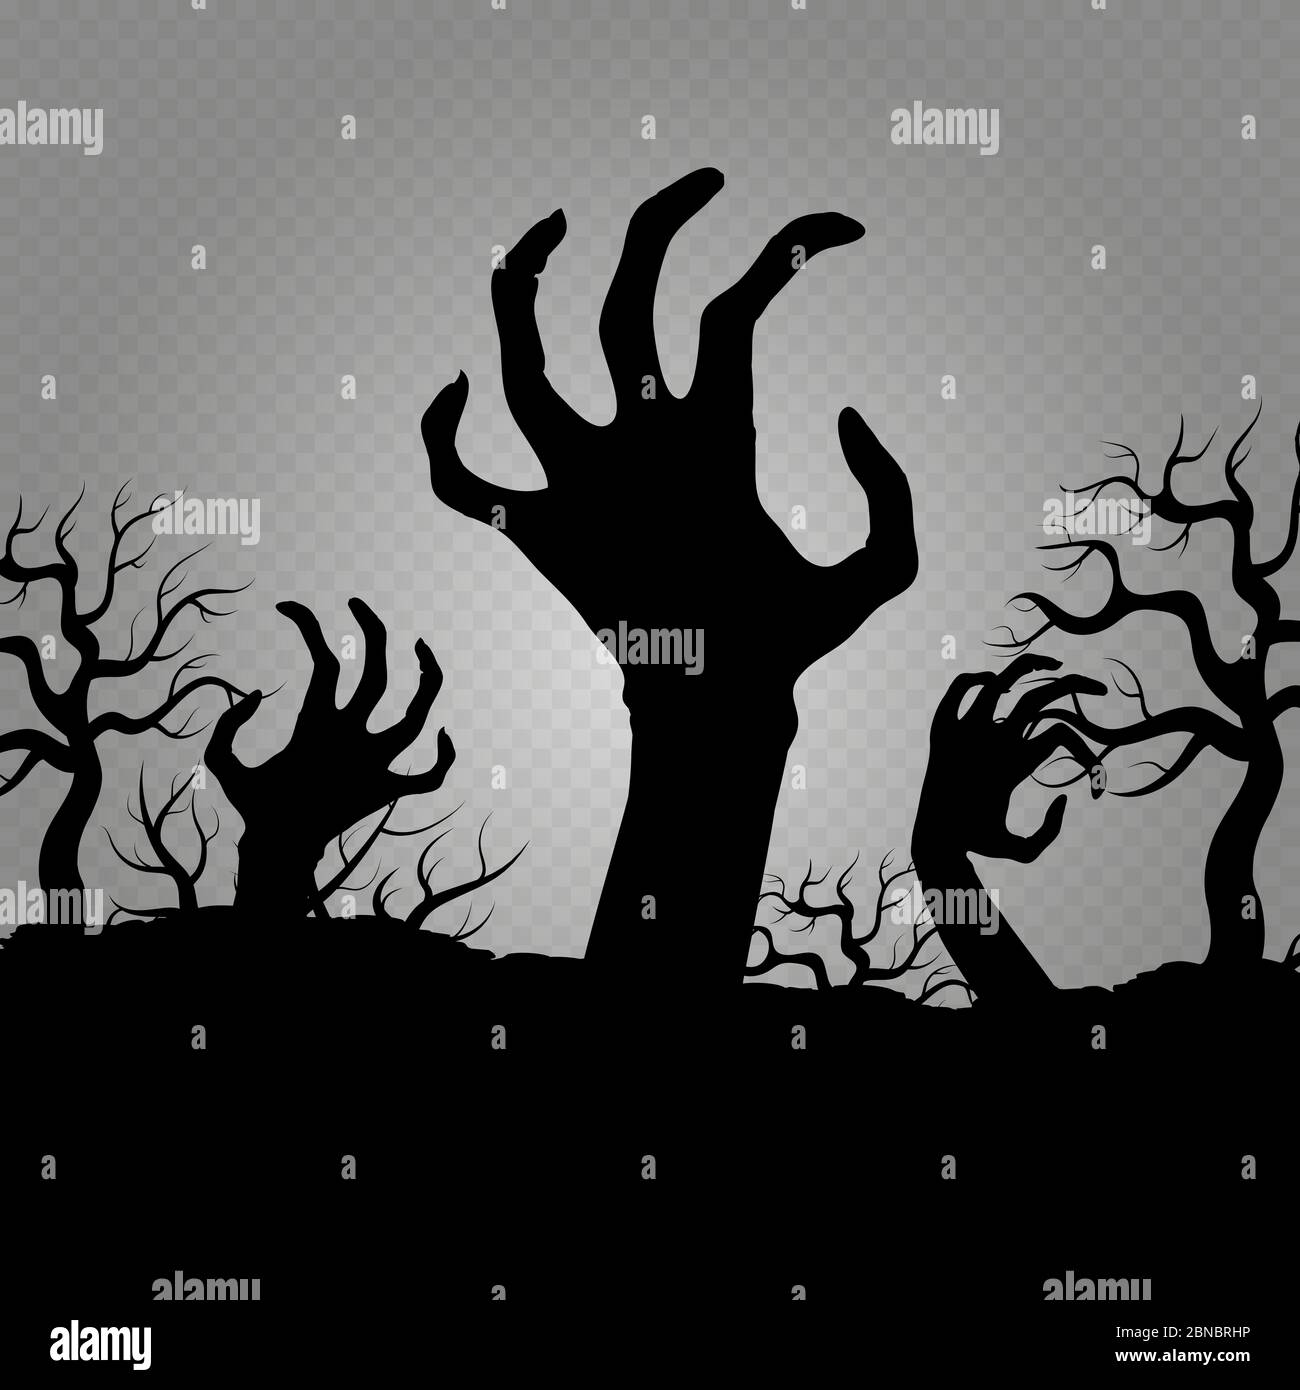 Zombi hands isolated on transparent background. Horror element for halloween party banners, posters, flyers illustration vector Stock Vector